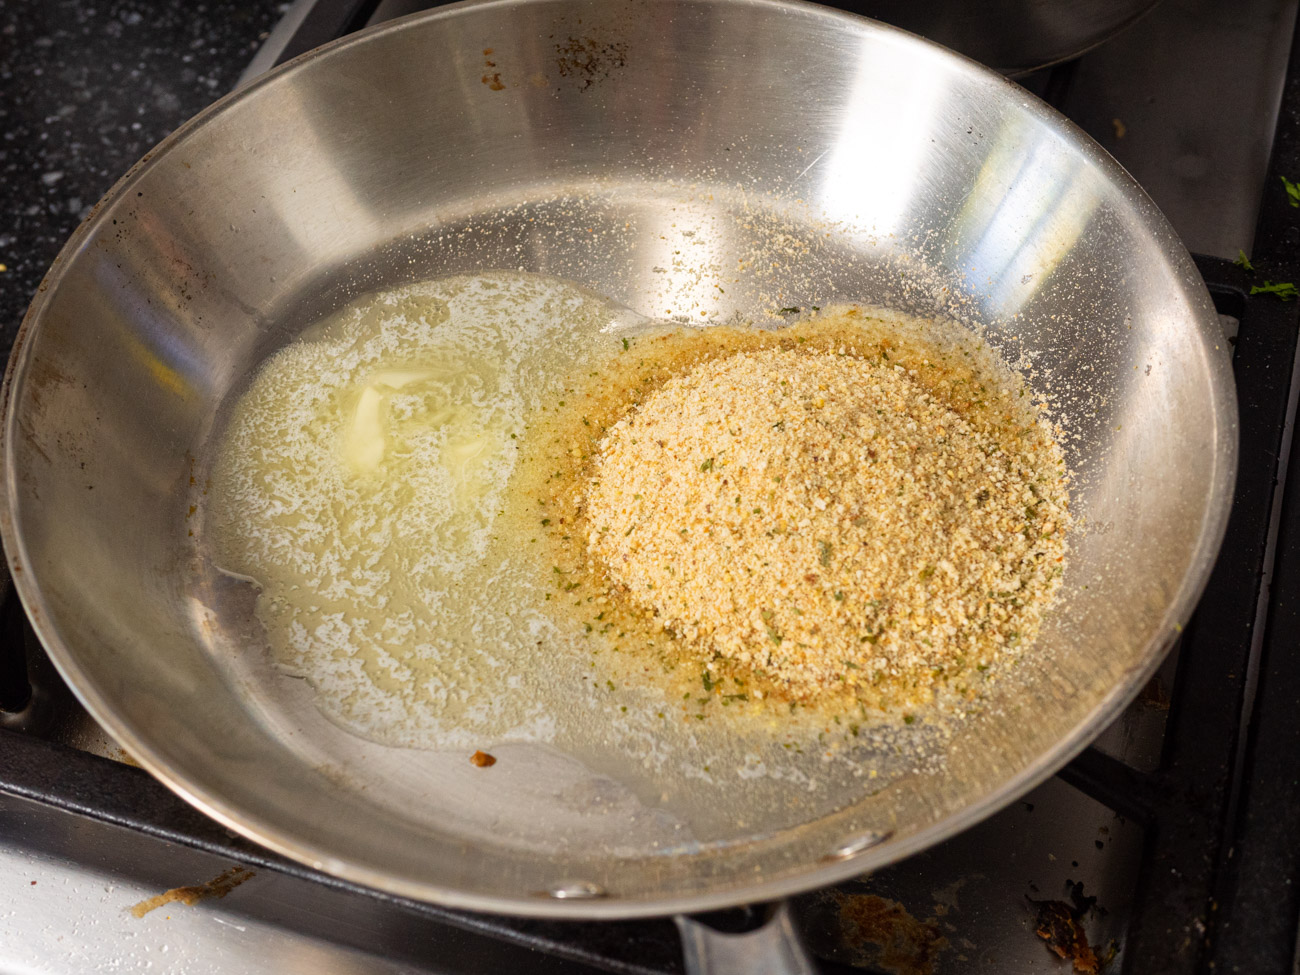 In a skillet, melt the 1 tablespoon butter. Add breadcrumbs and stir until golden brown, 1-2 minutes. Remove from skillet to a bowl and set aside.